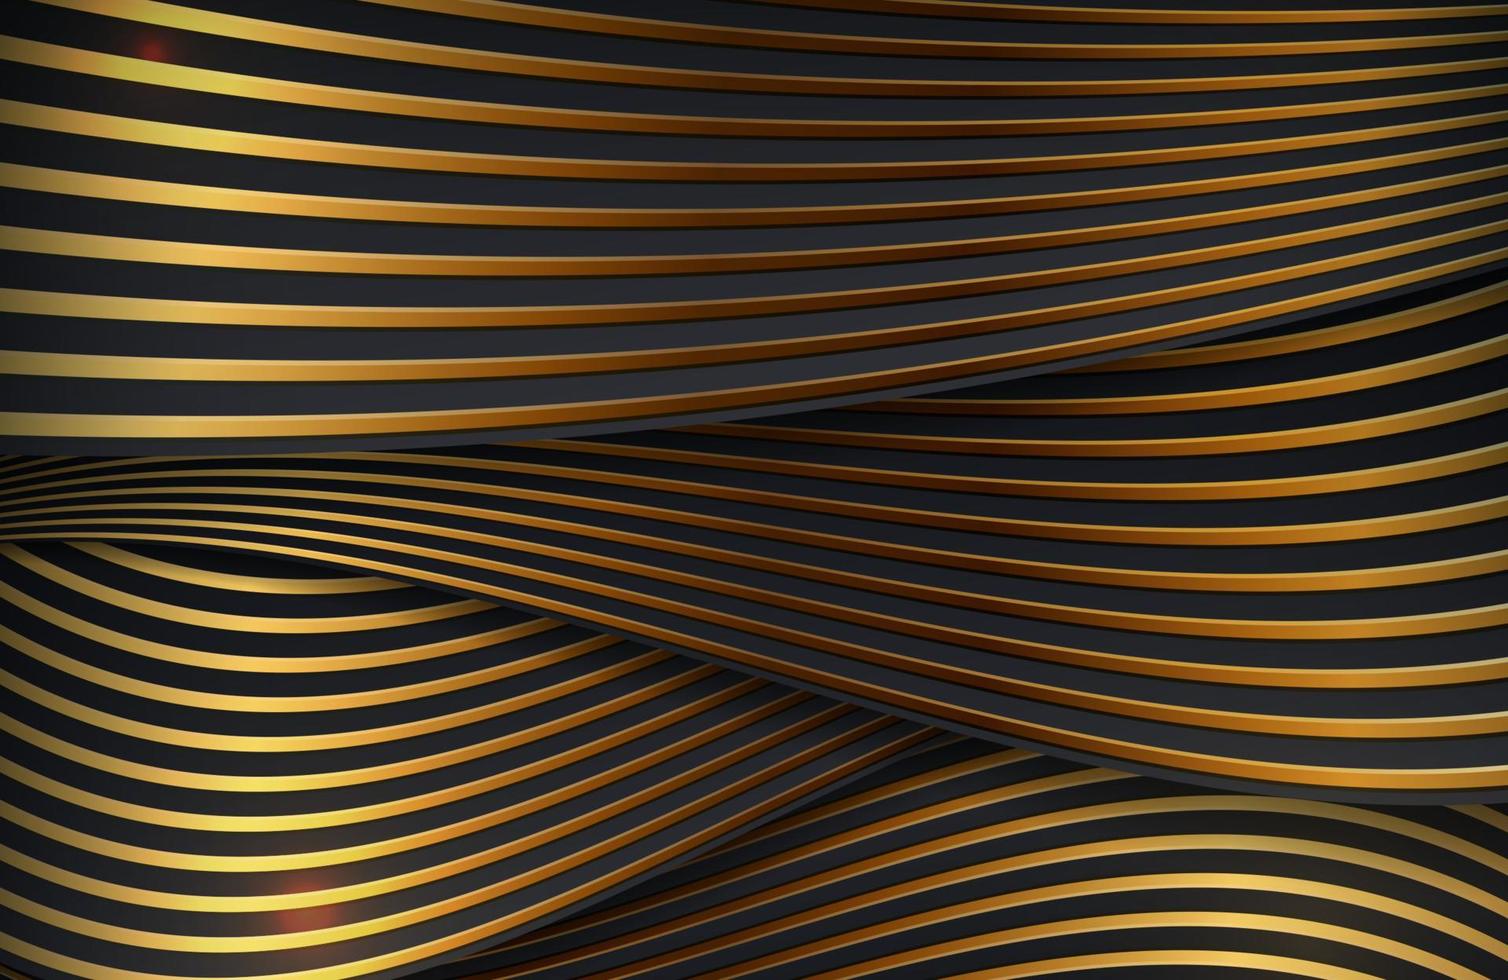 Dynamic wavy Black and gold lines luxury elegant background vector